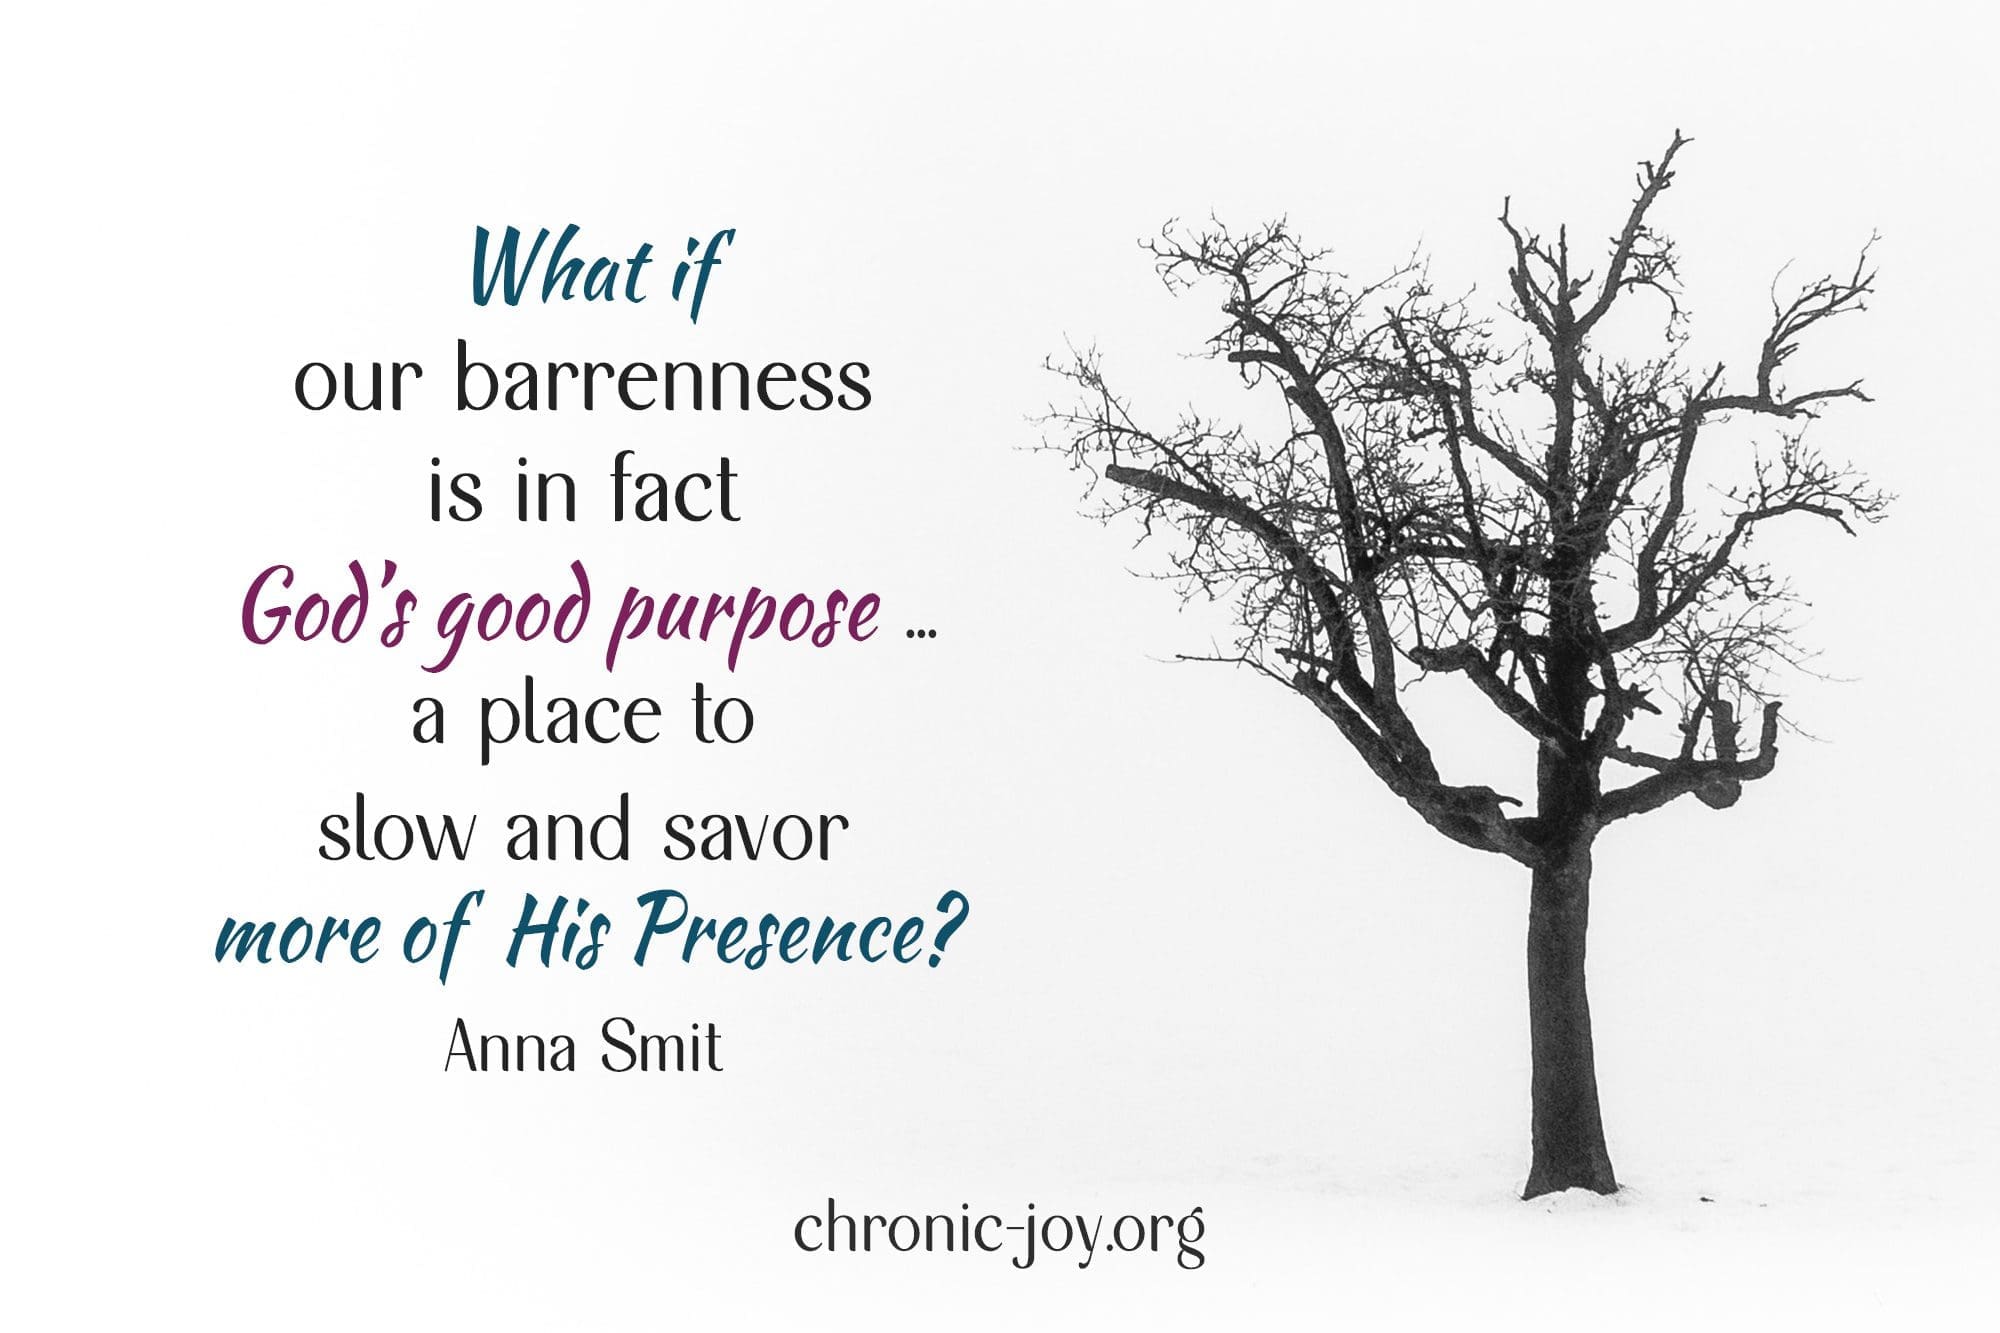 "What if our barrenness is in fact God’s good purpose ... a place to slow and savor more of His Presence?" Anna Smit